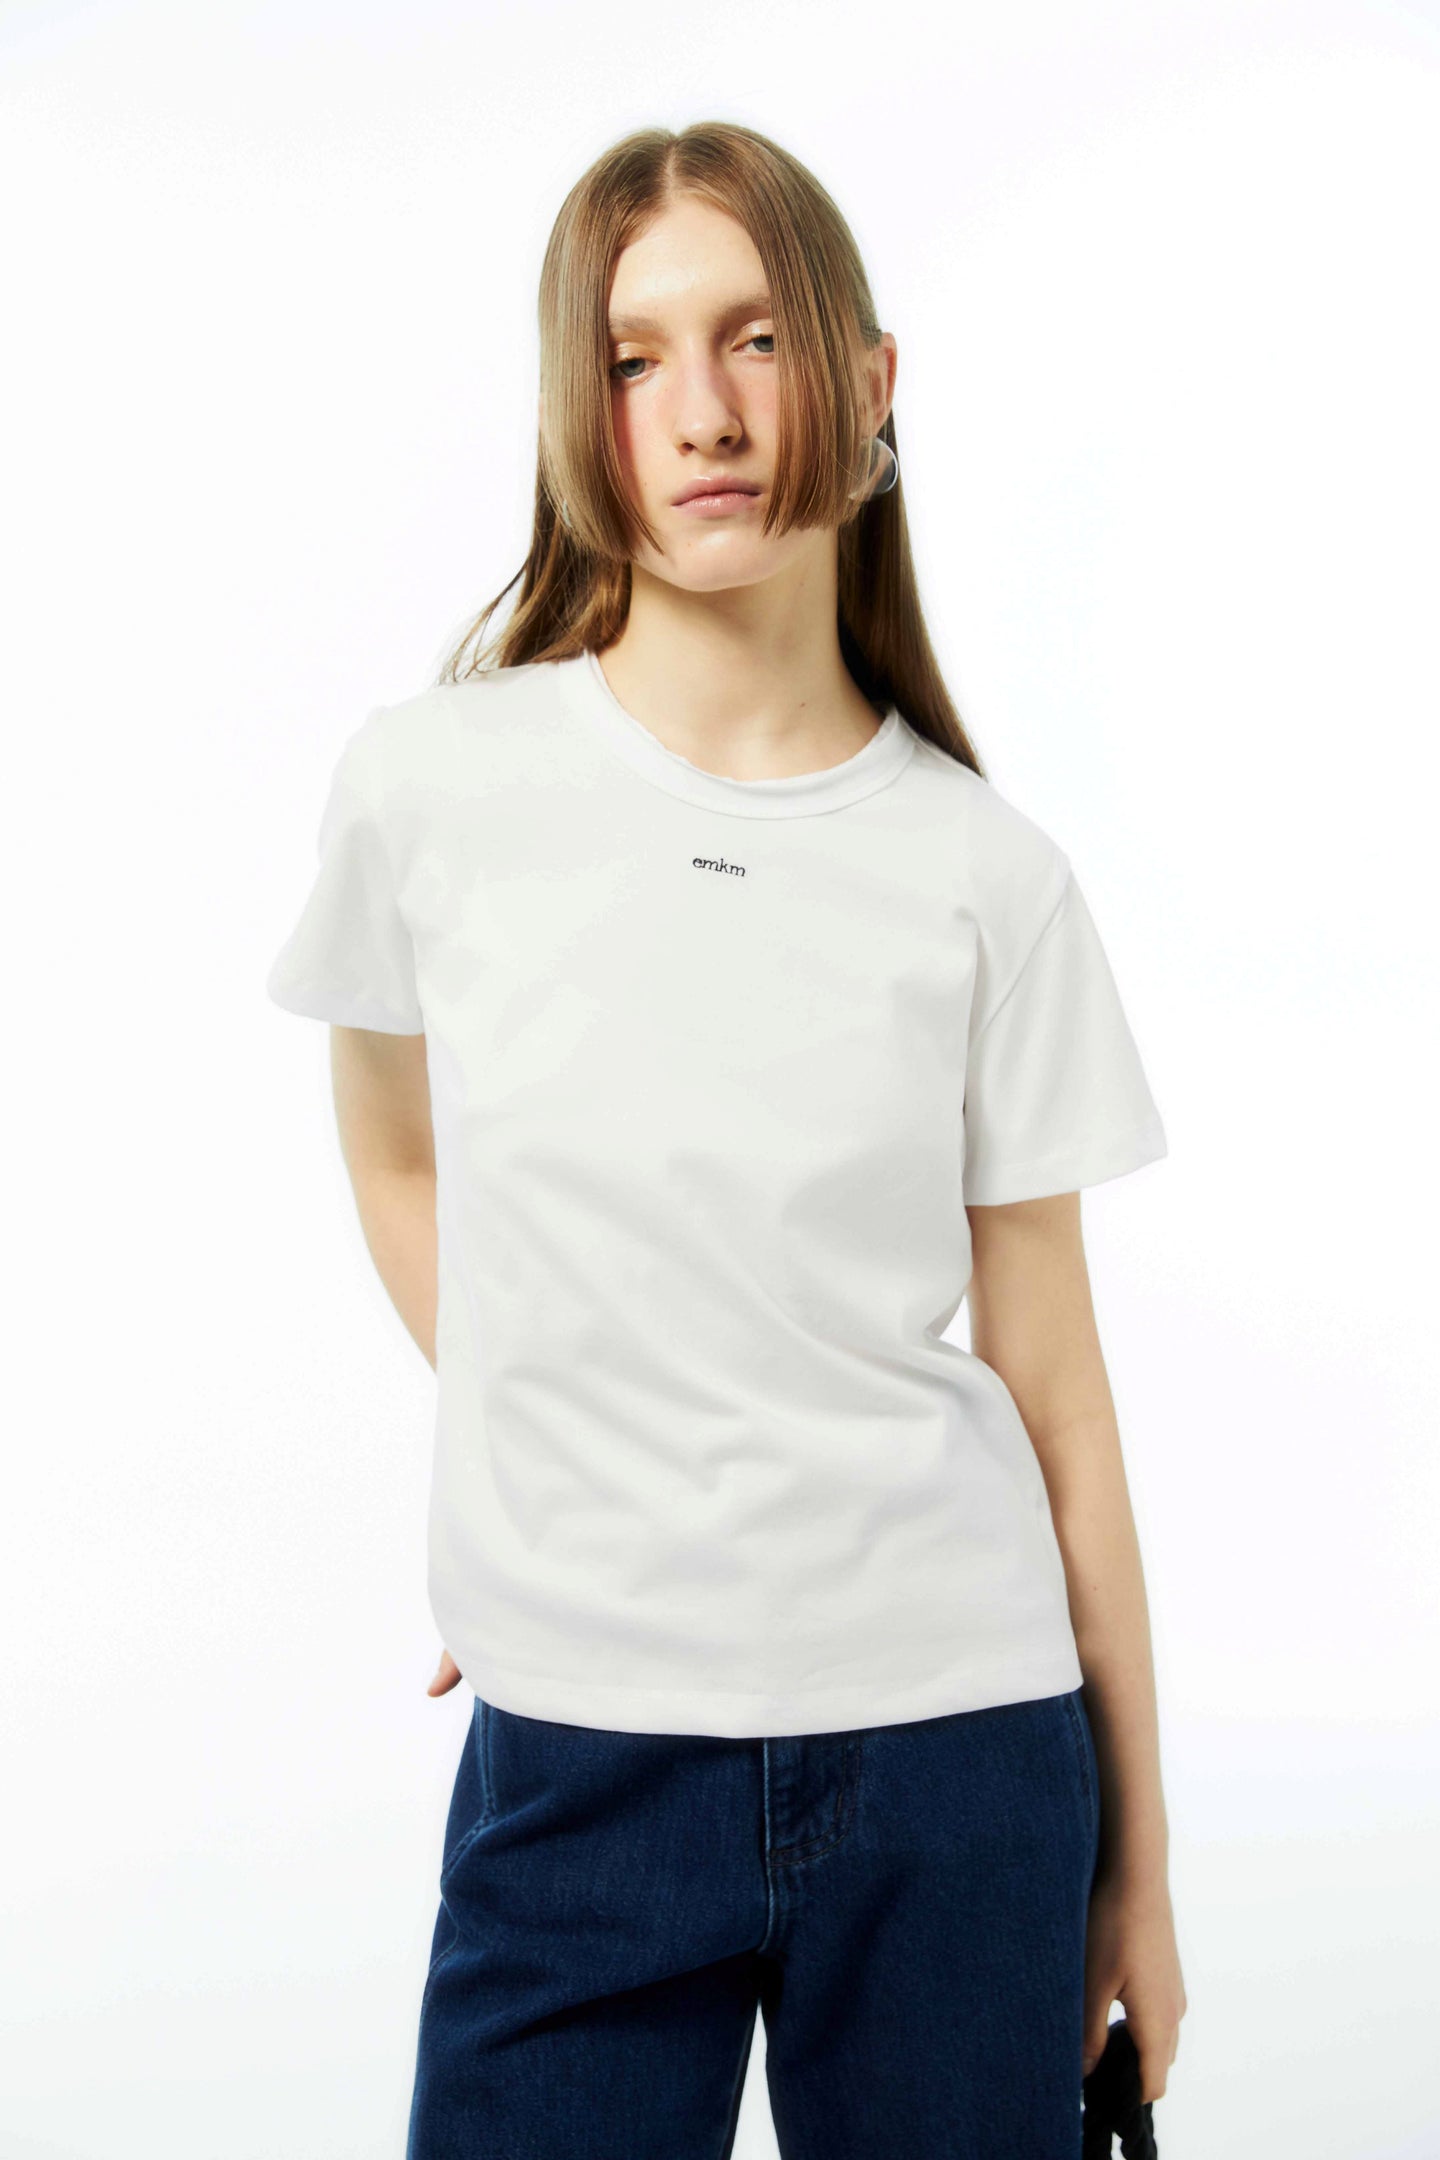 EMKM Supima Curlup Neck Embroidery Tshirts